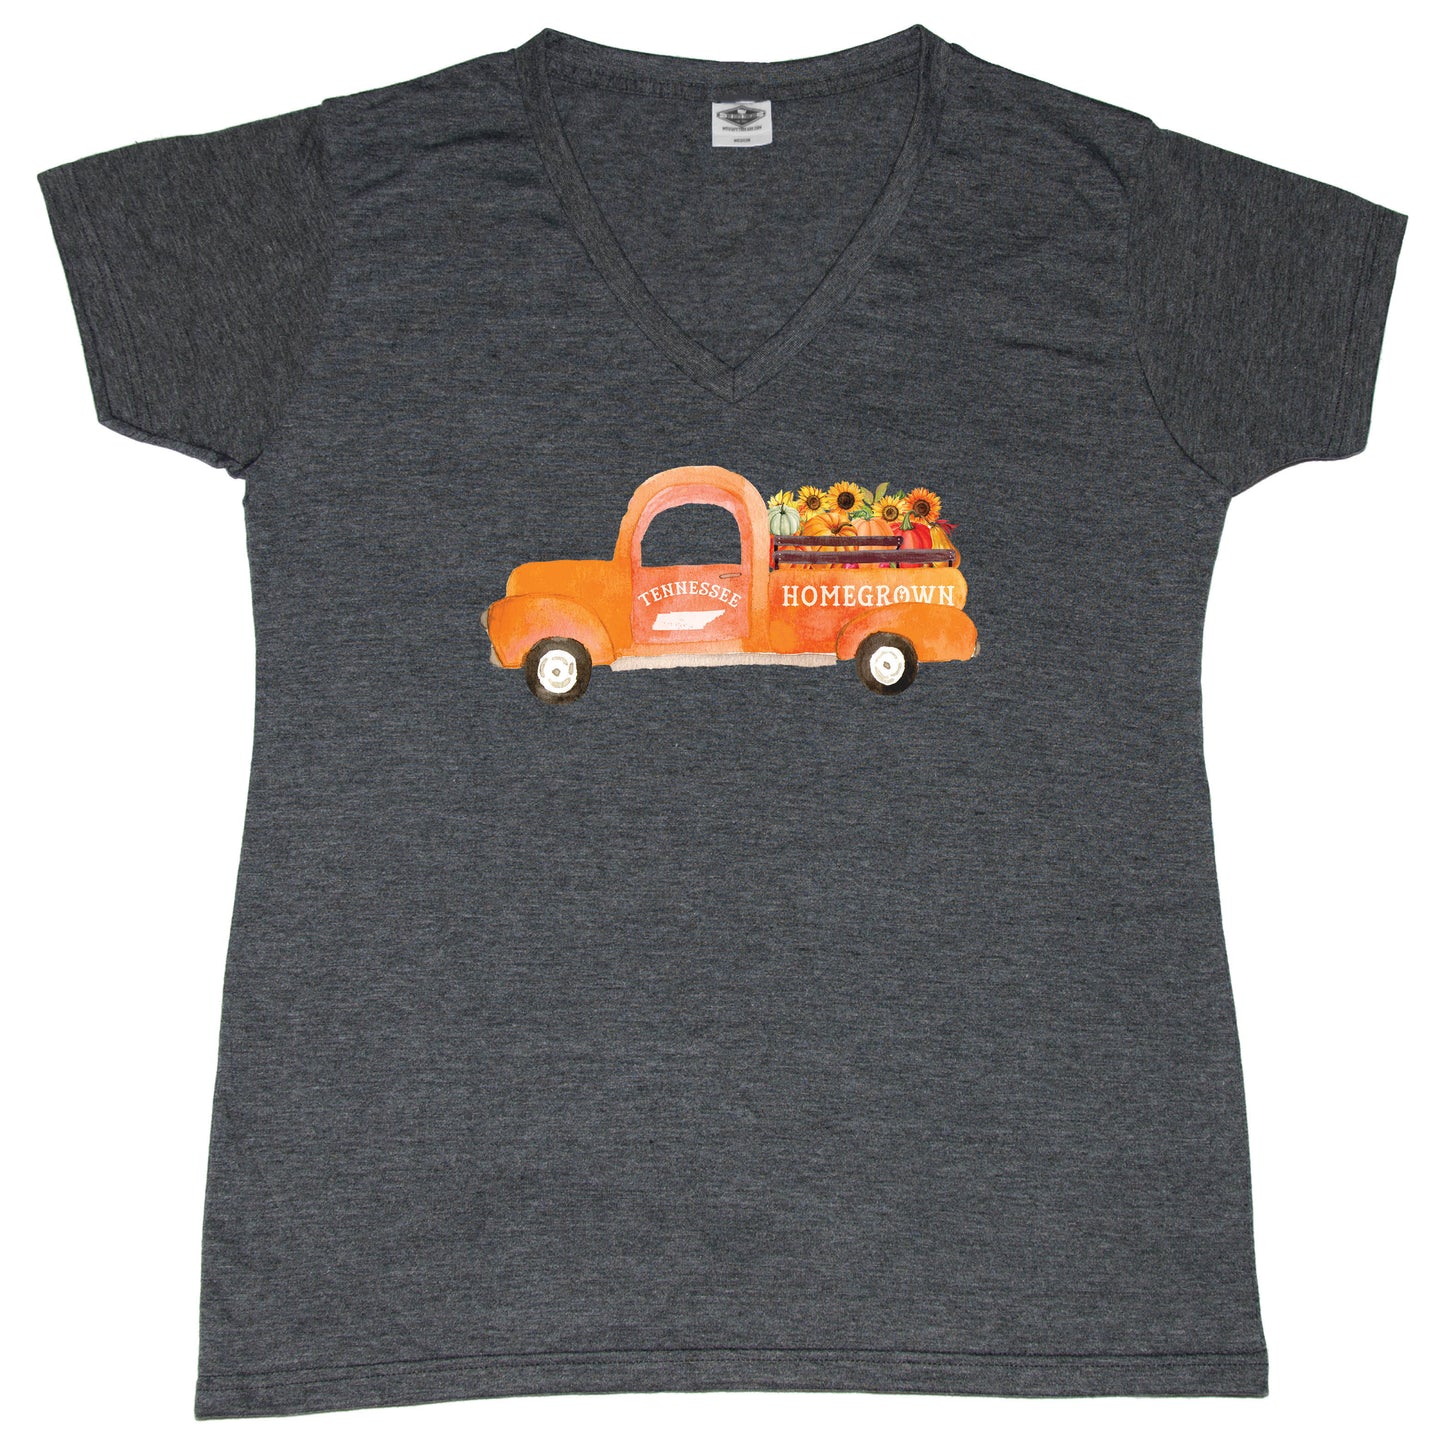 Tennessee Fall Homegrown Truck - Ladies' Tee